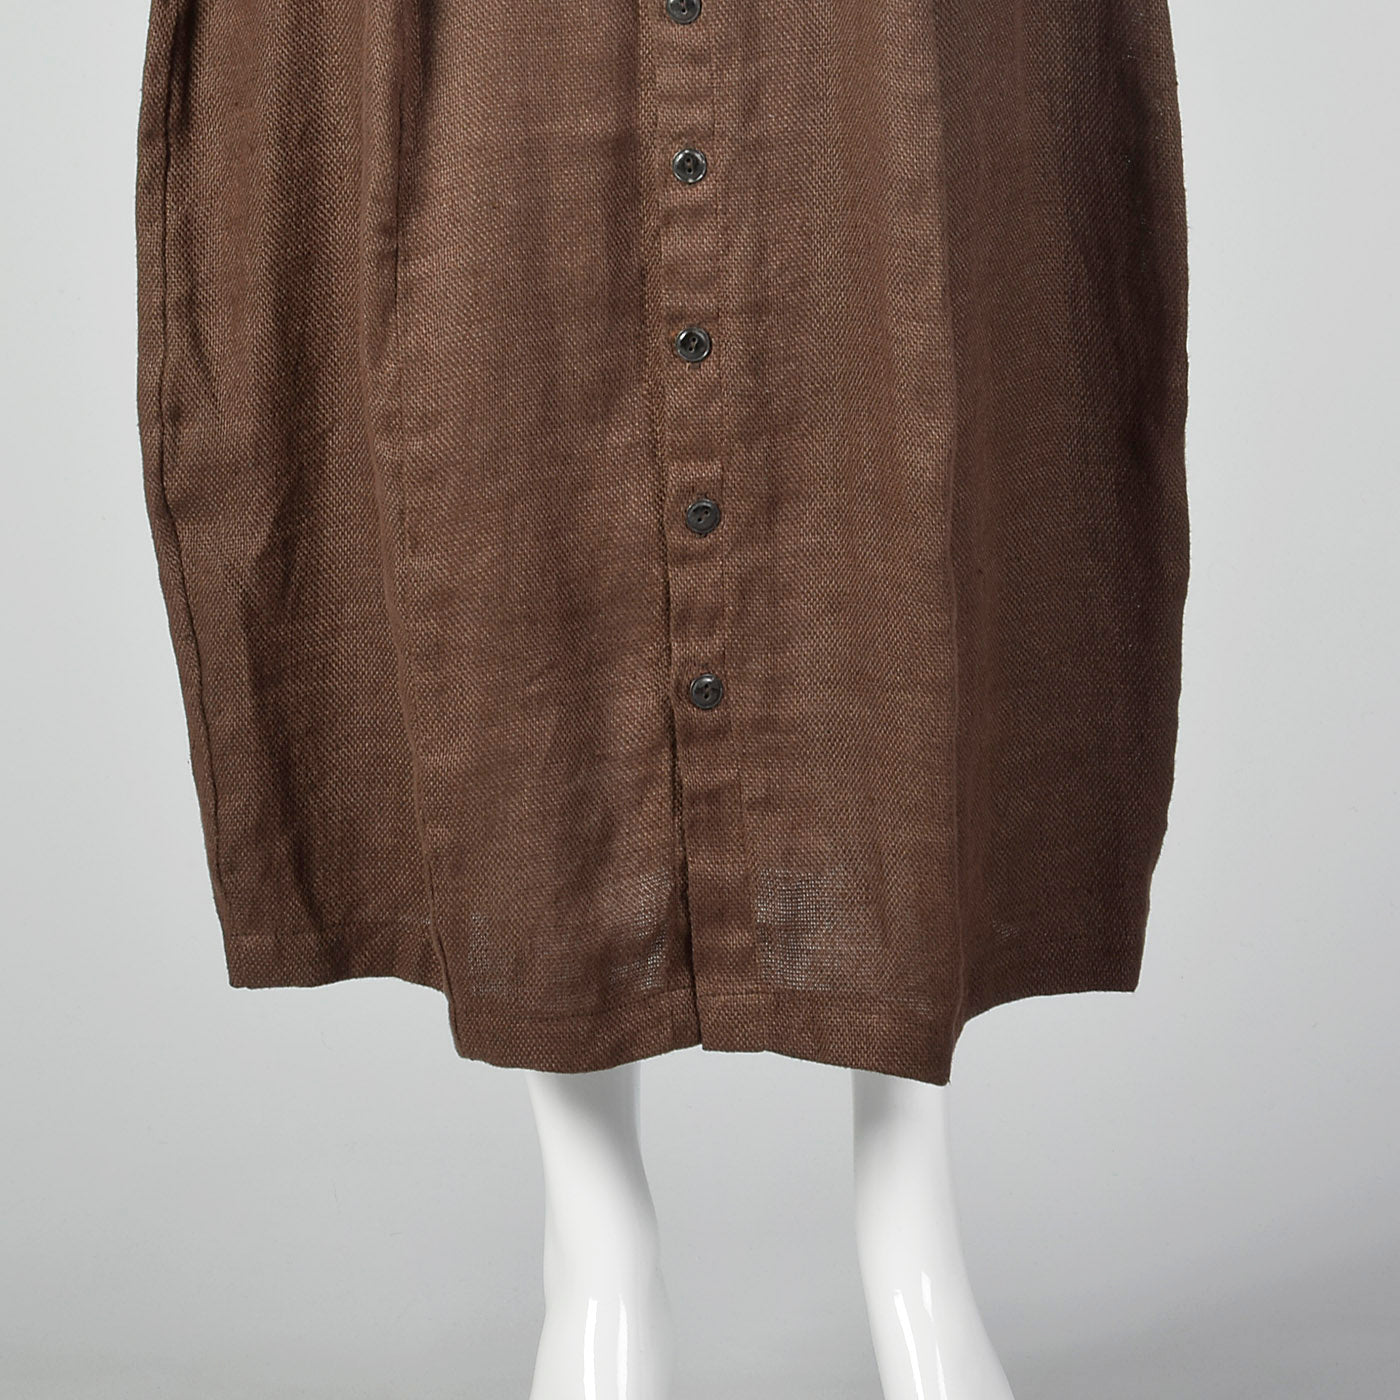 1990s Brown Linen Skirt with Button Front